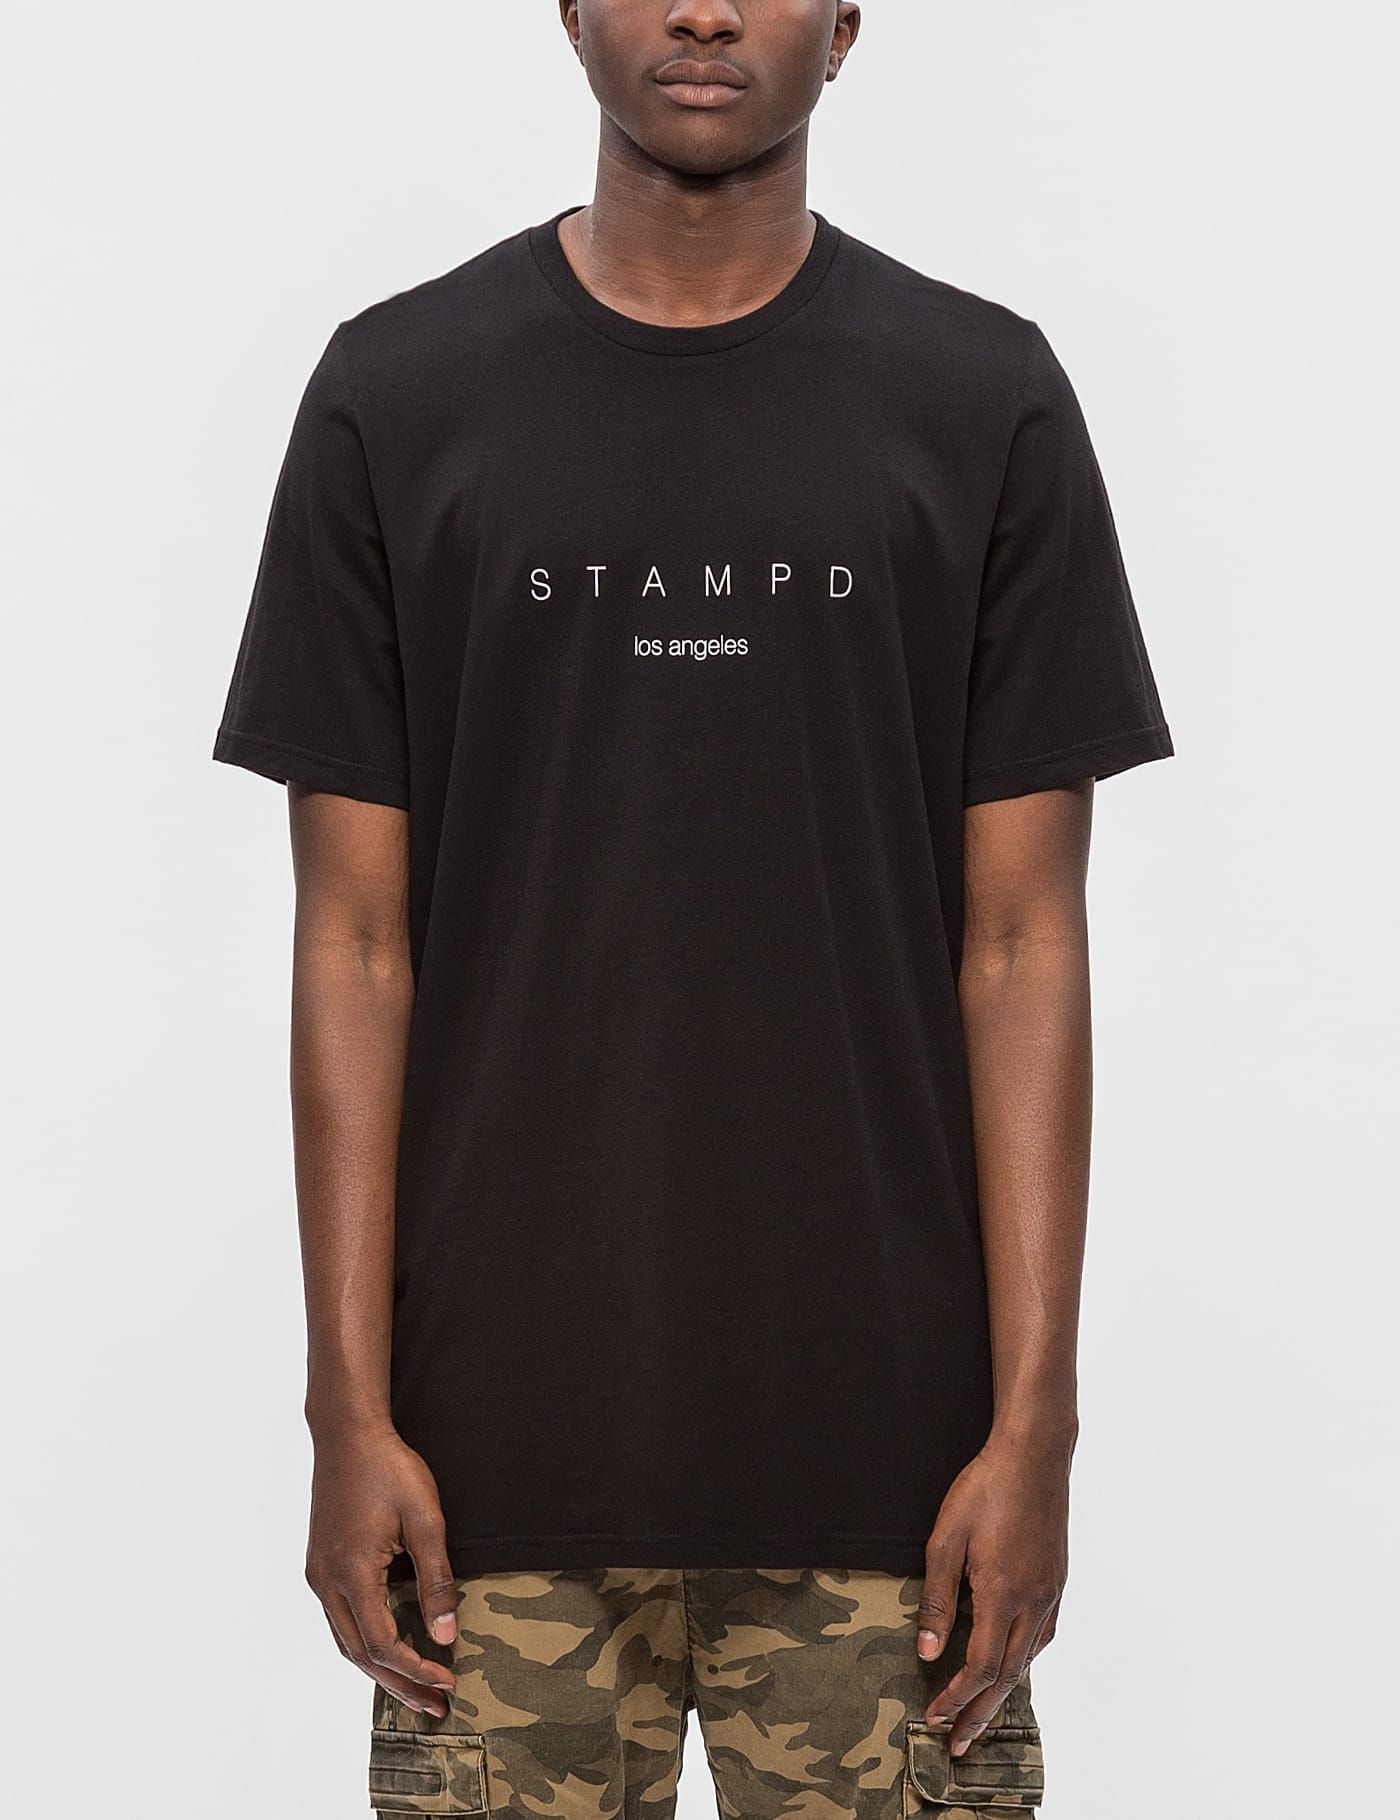 stampd  送料無料！！